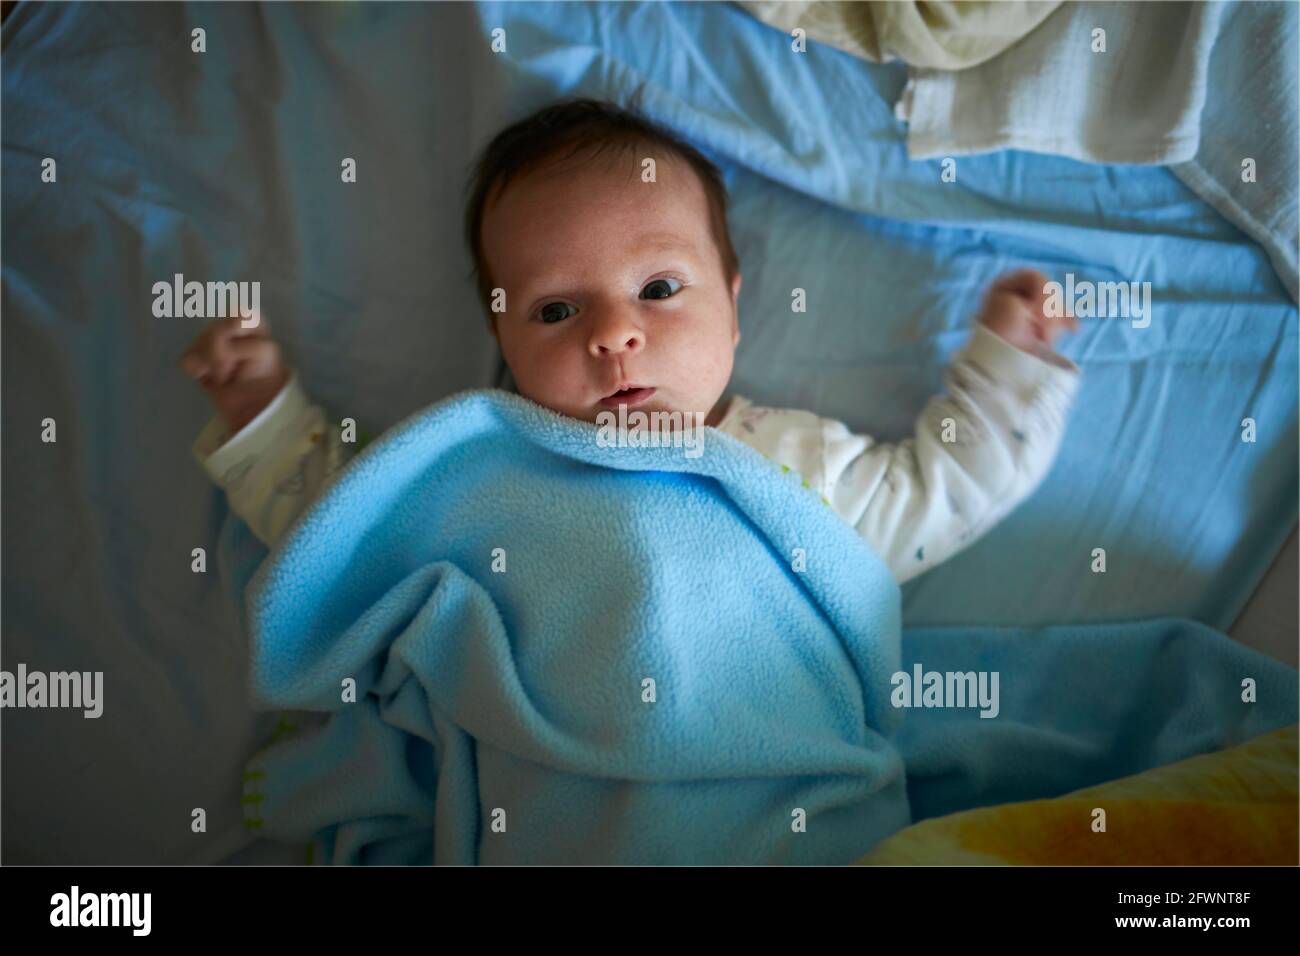 Playful newborn baby in a bed Stock Photo